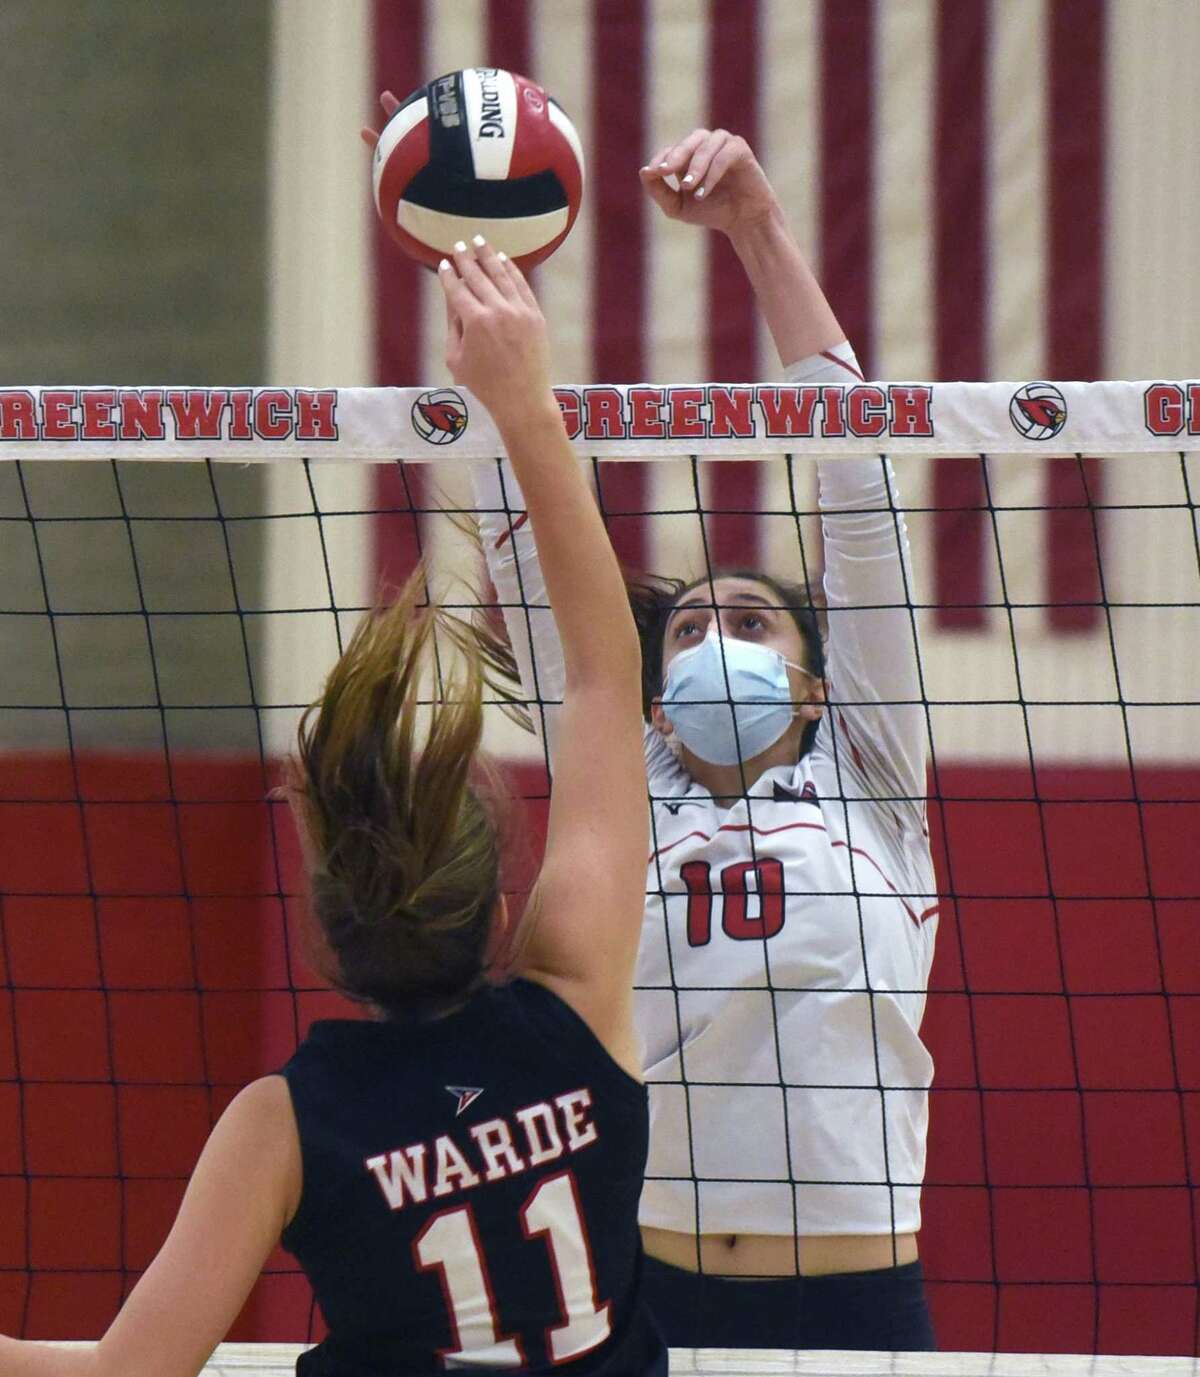 Greenwich’s Liana Sarkissian (10) blocks a shot by Warde’s Selina Torstere (11) during an FCIAC quarterfinal match in Greenwich on Tues., Nov. 2, 2021.